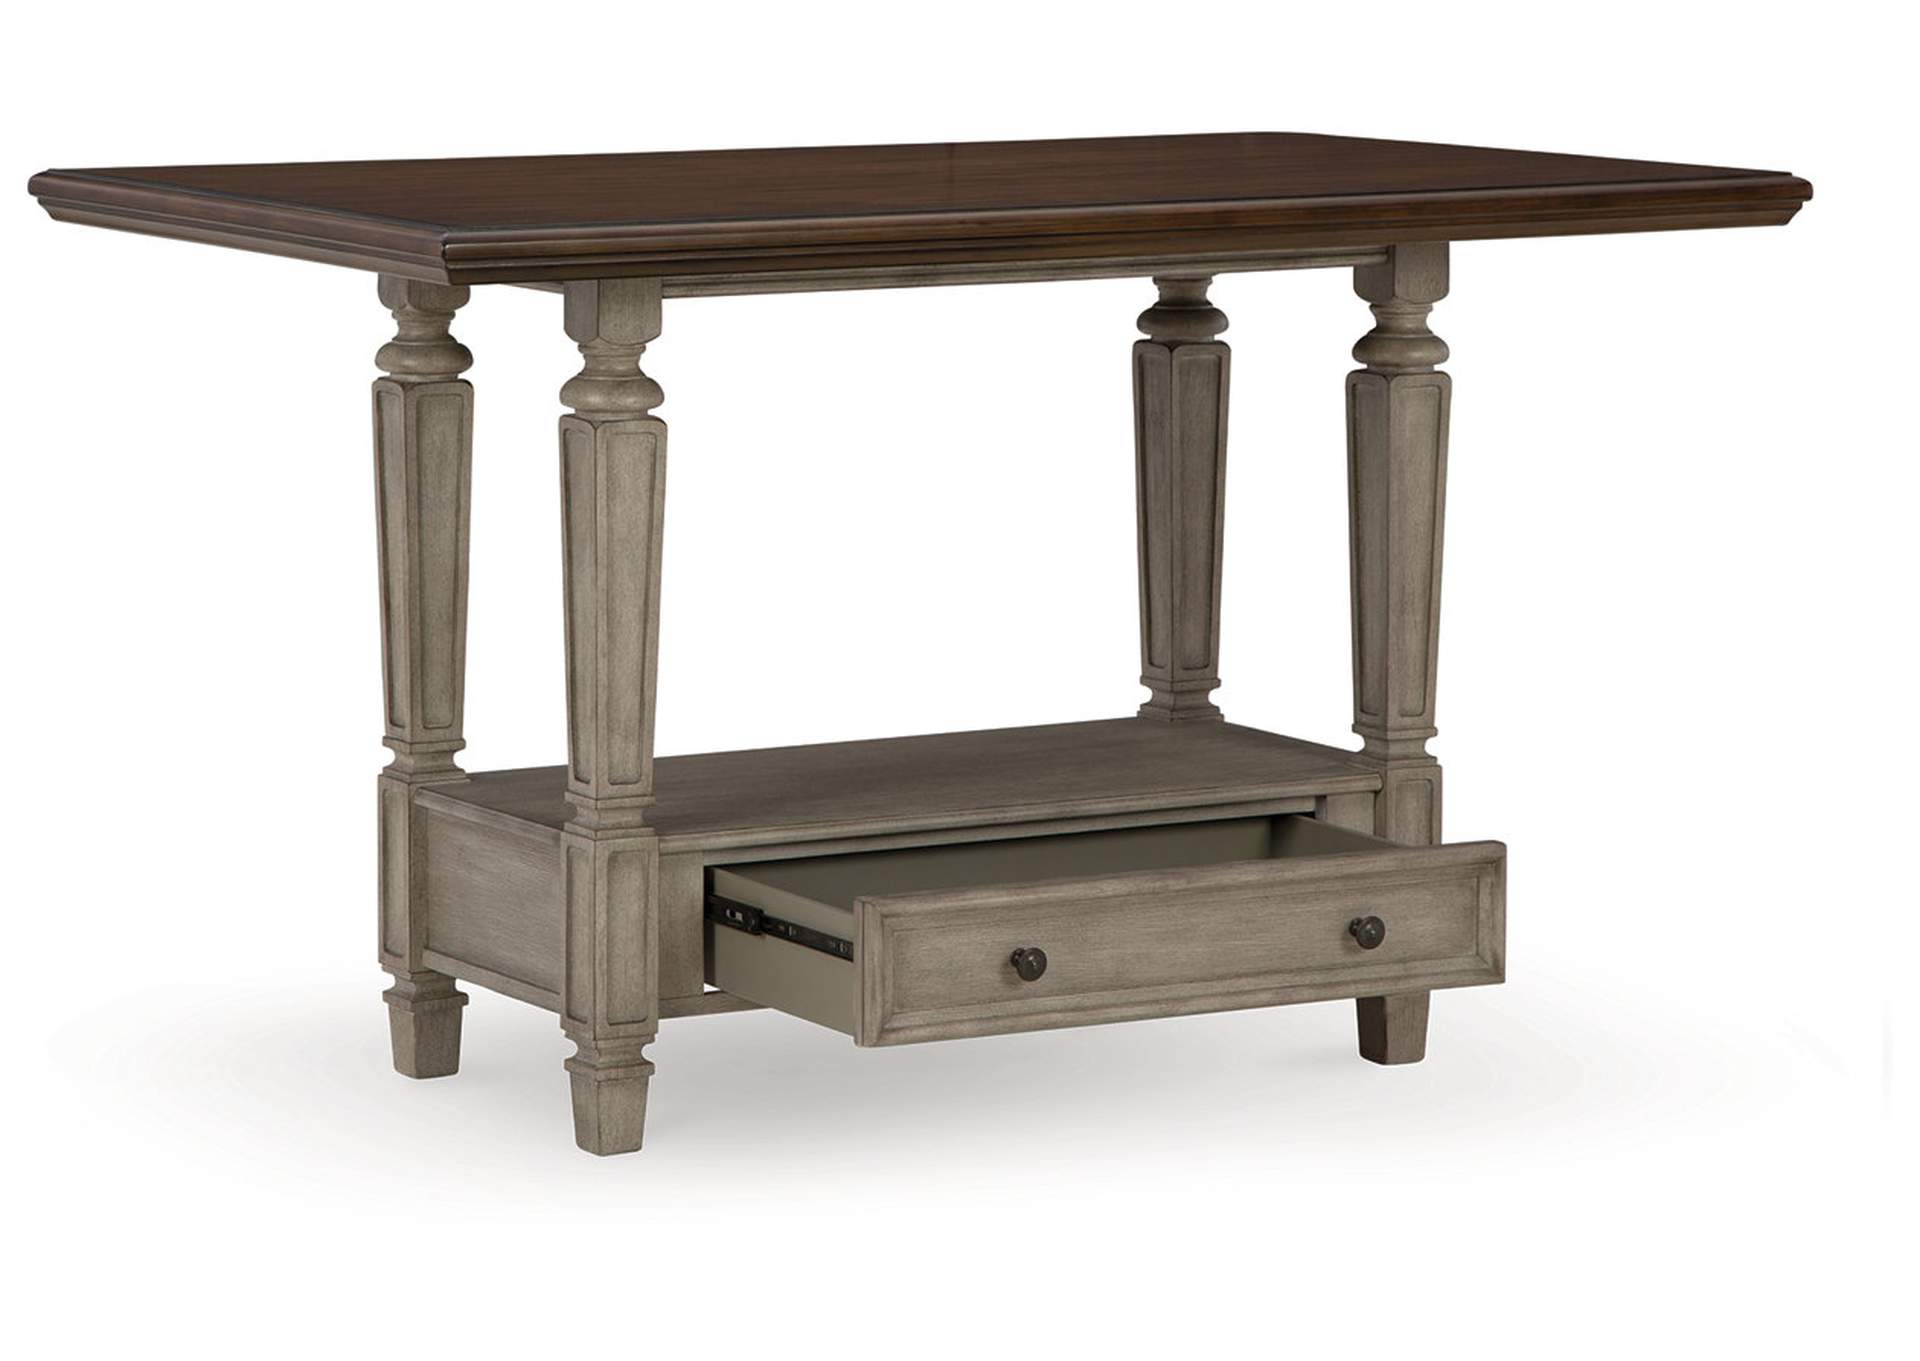 Lodenbay Counter Height Dining Table,Signature Design By Ashley